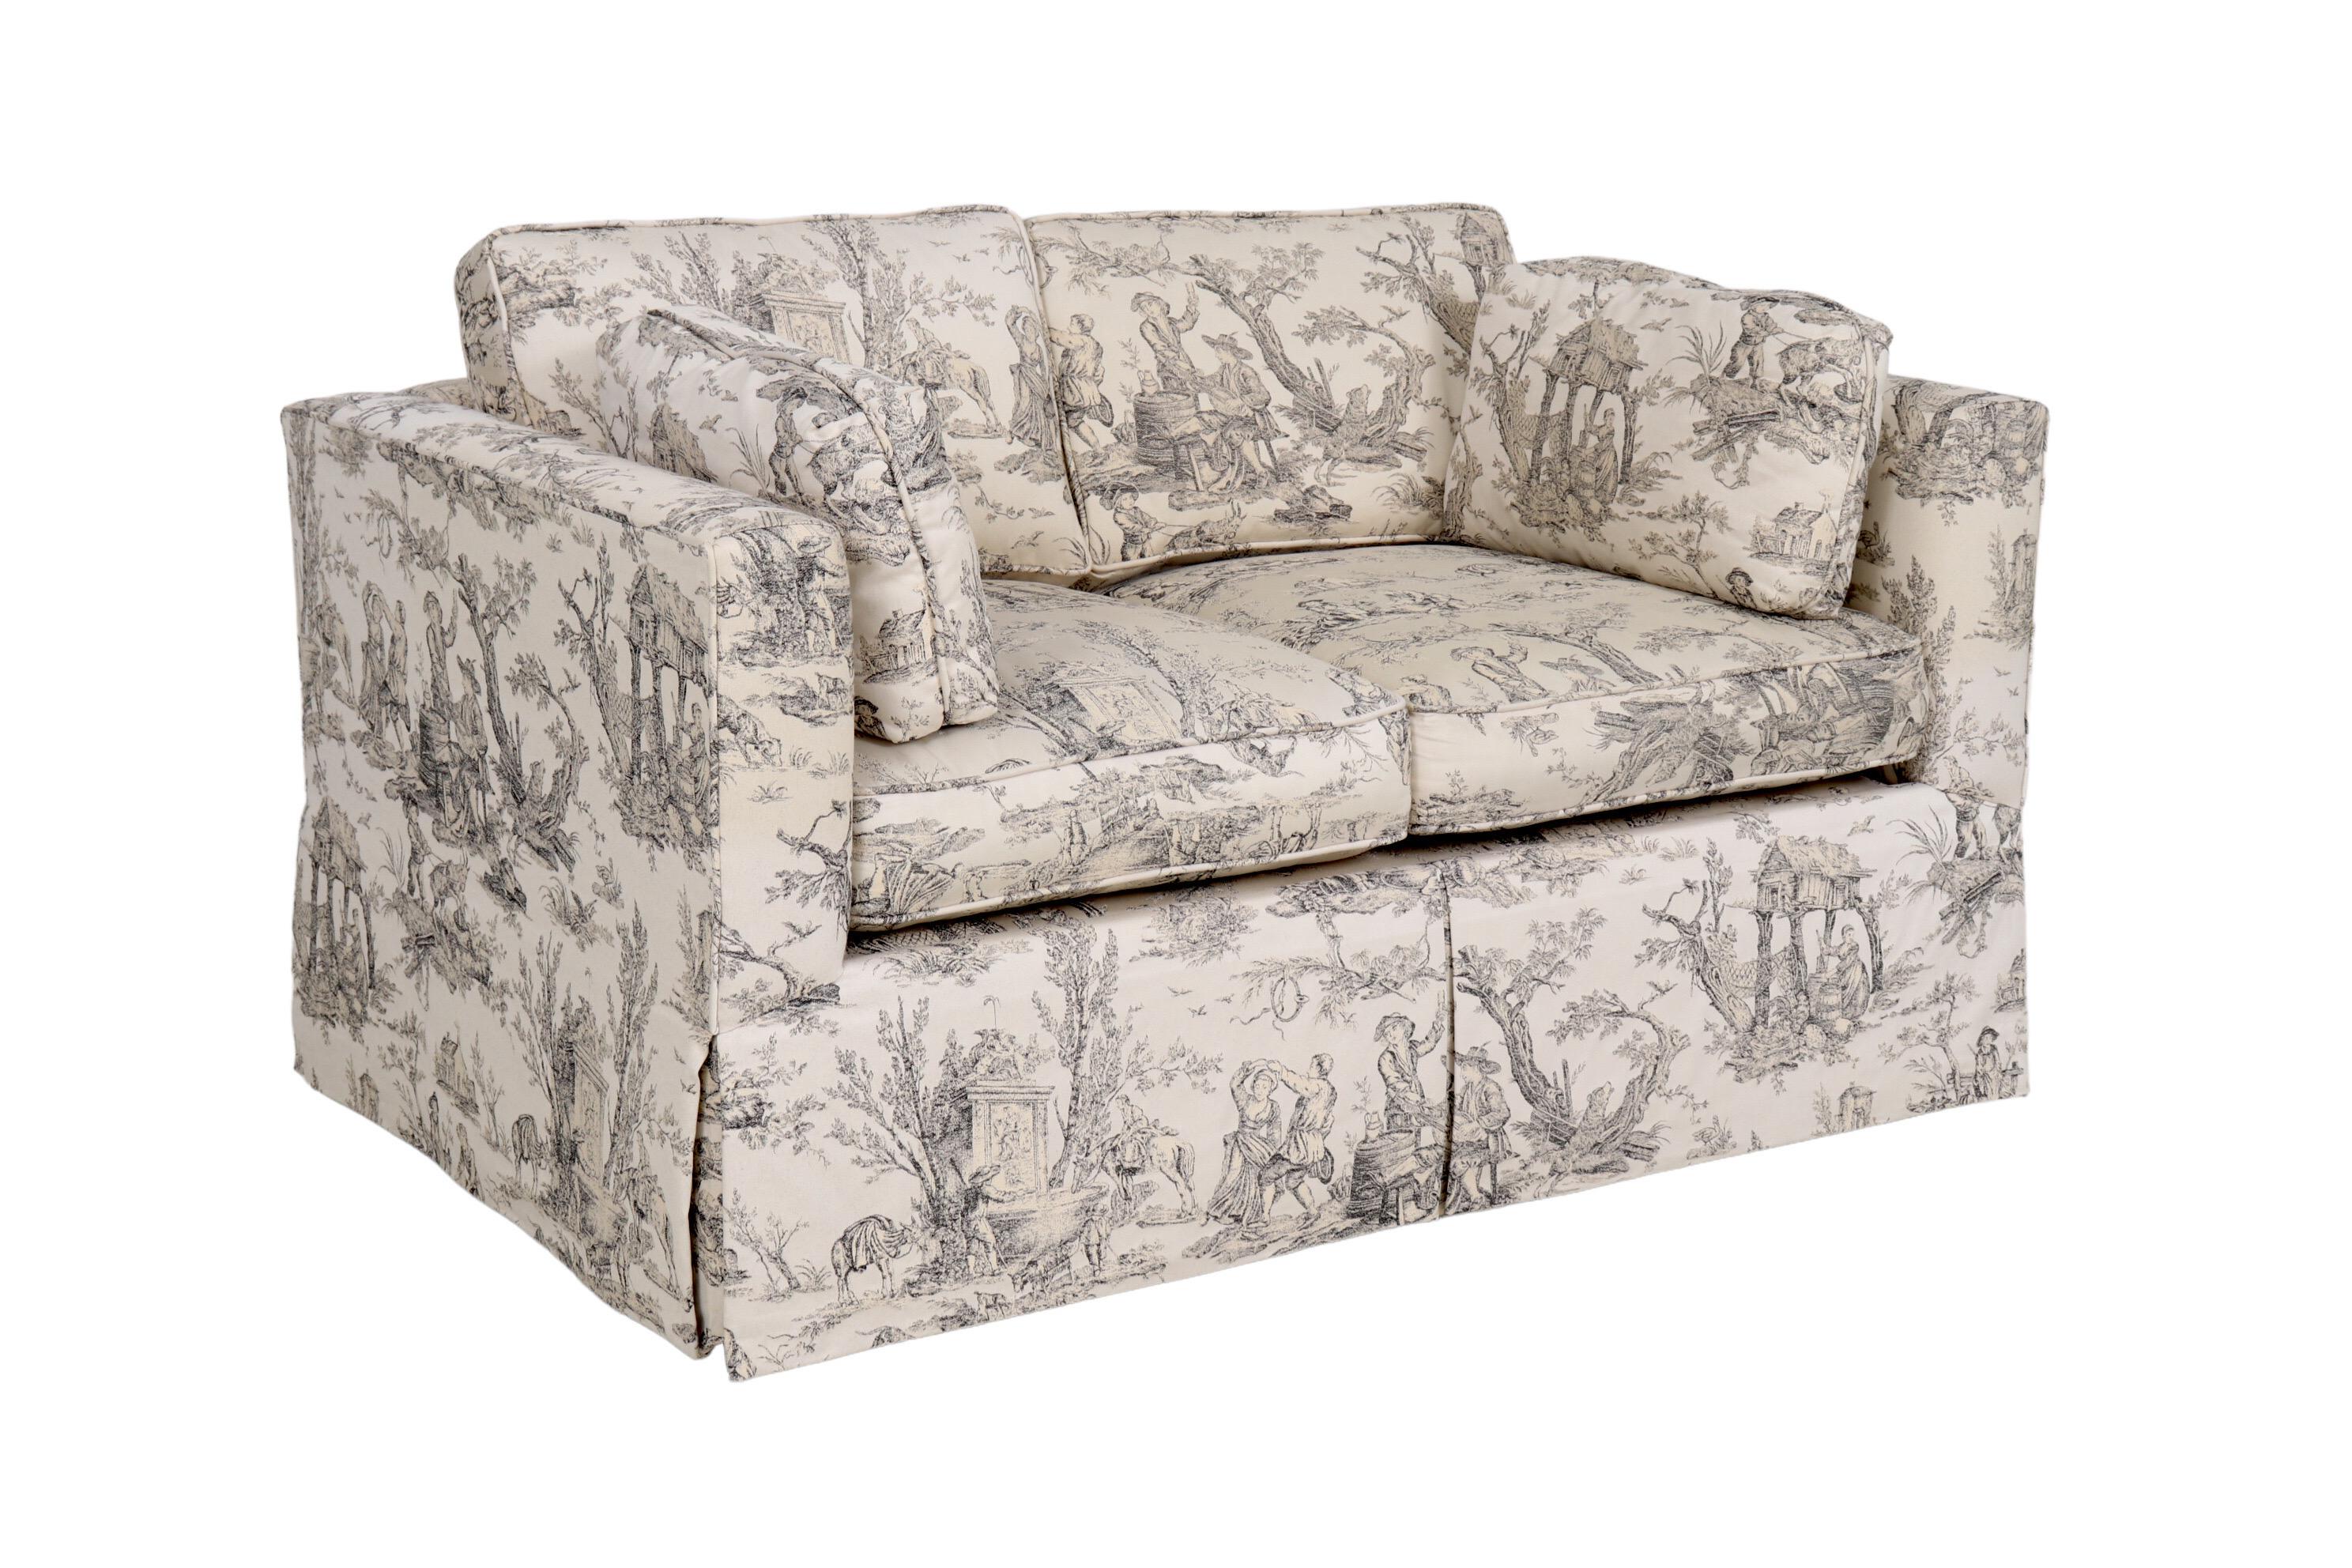 A Tuxedo style loveseat sofa beautifully upholstered in a toile jacquard titled “L' Abreuvoir” or ‘The Drinking Trough’ designed by Jean-Baptiste Huet, and originally printed by Manufacture Royale de Oberkampf, Jouy-en-Josas, France, circa 1792.